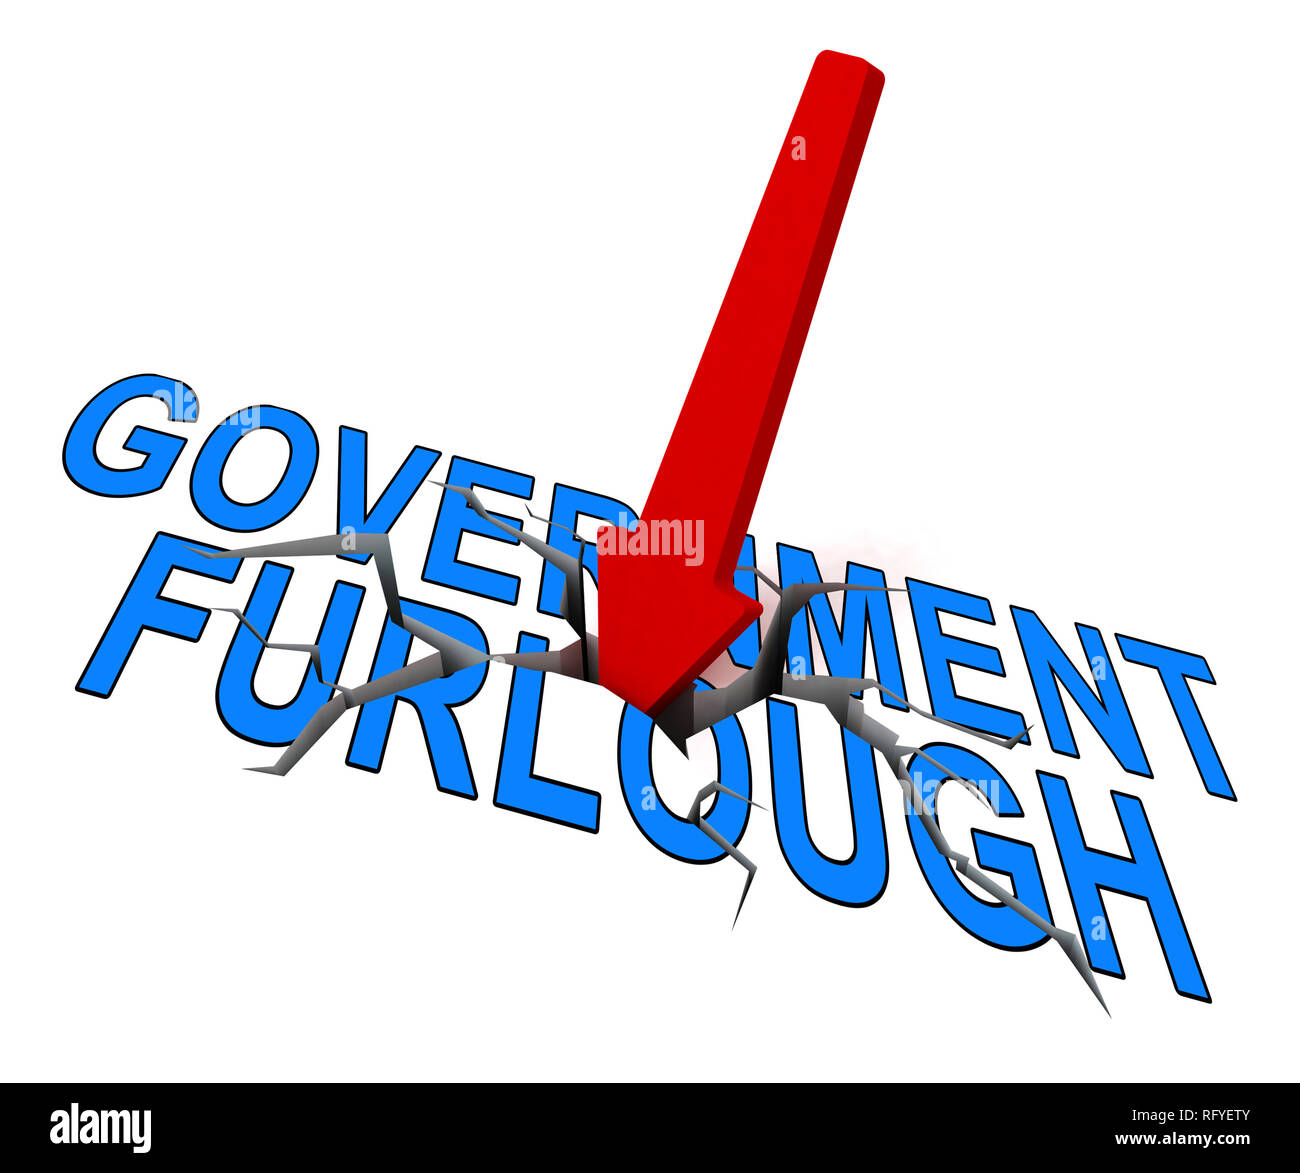 Government Furlough Arrow Means Layoff For Federal Workers. National Shutdown From Washington - 3d Illustration Stock Photo